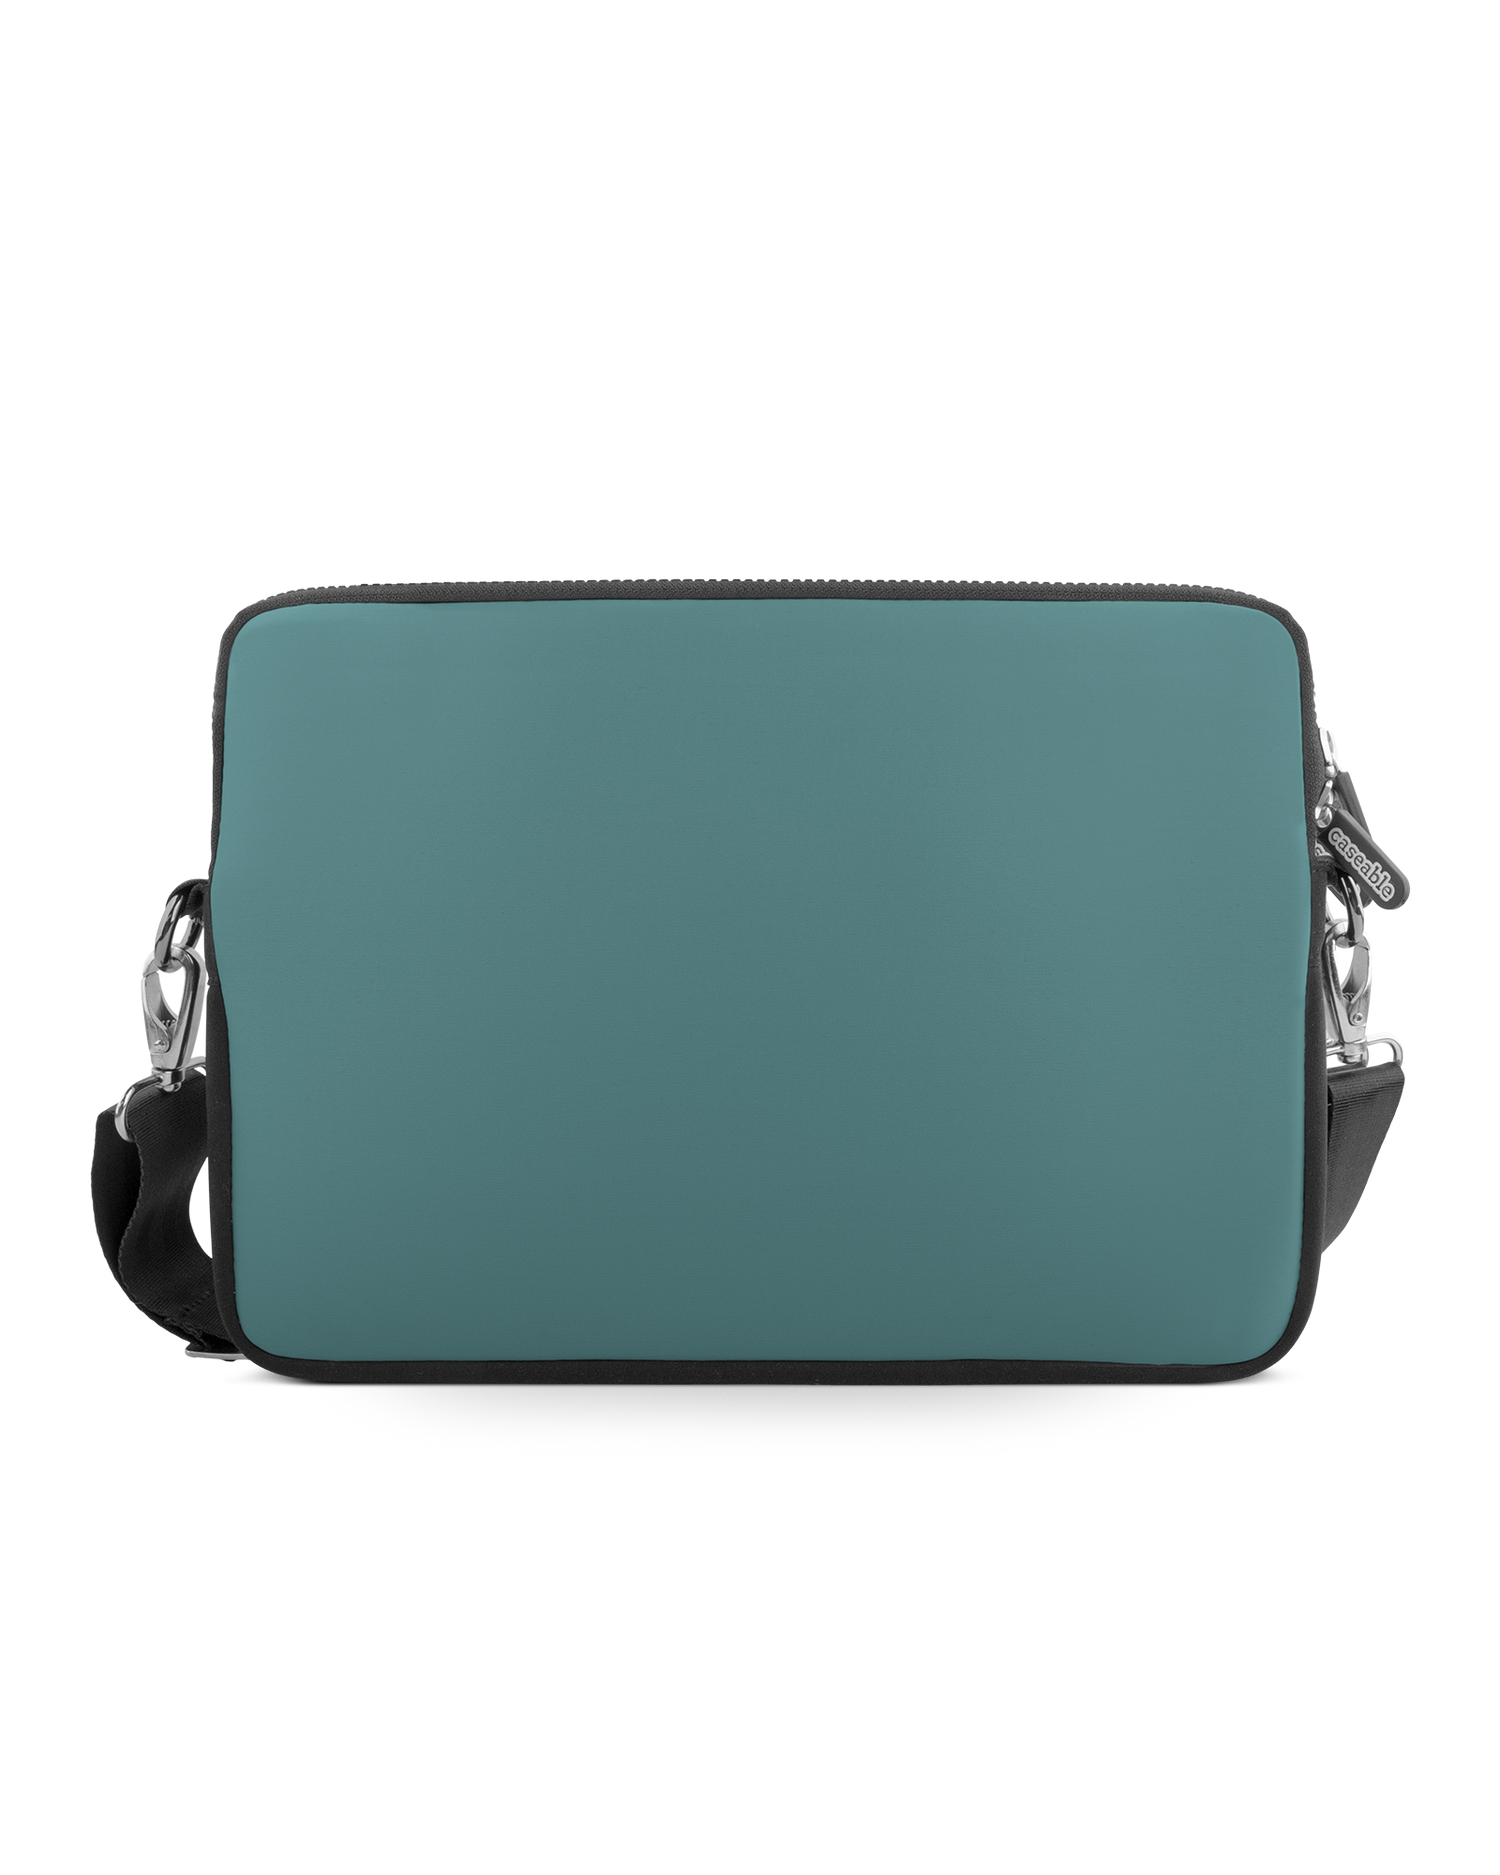 TURQUOISE Premium Laptop Bag 13-14 inch: Front View